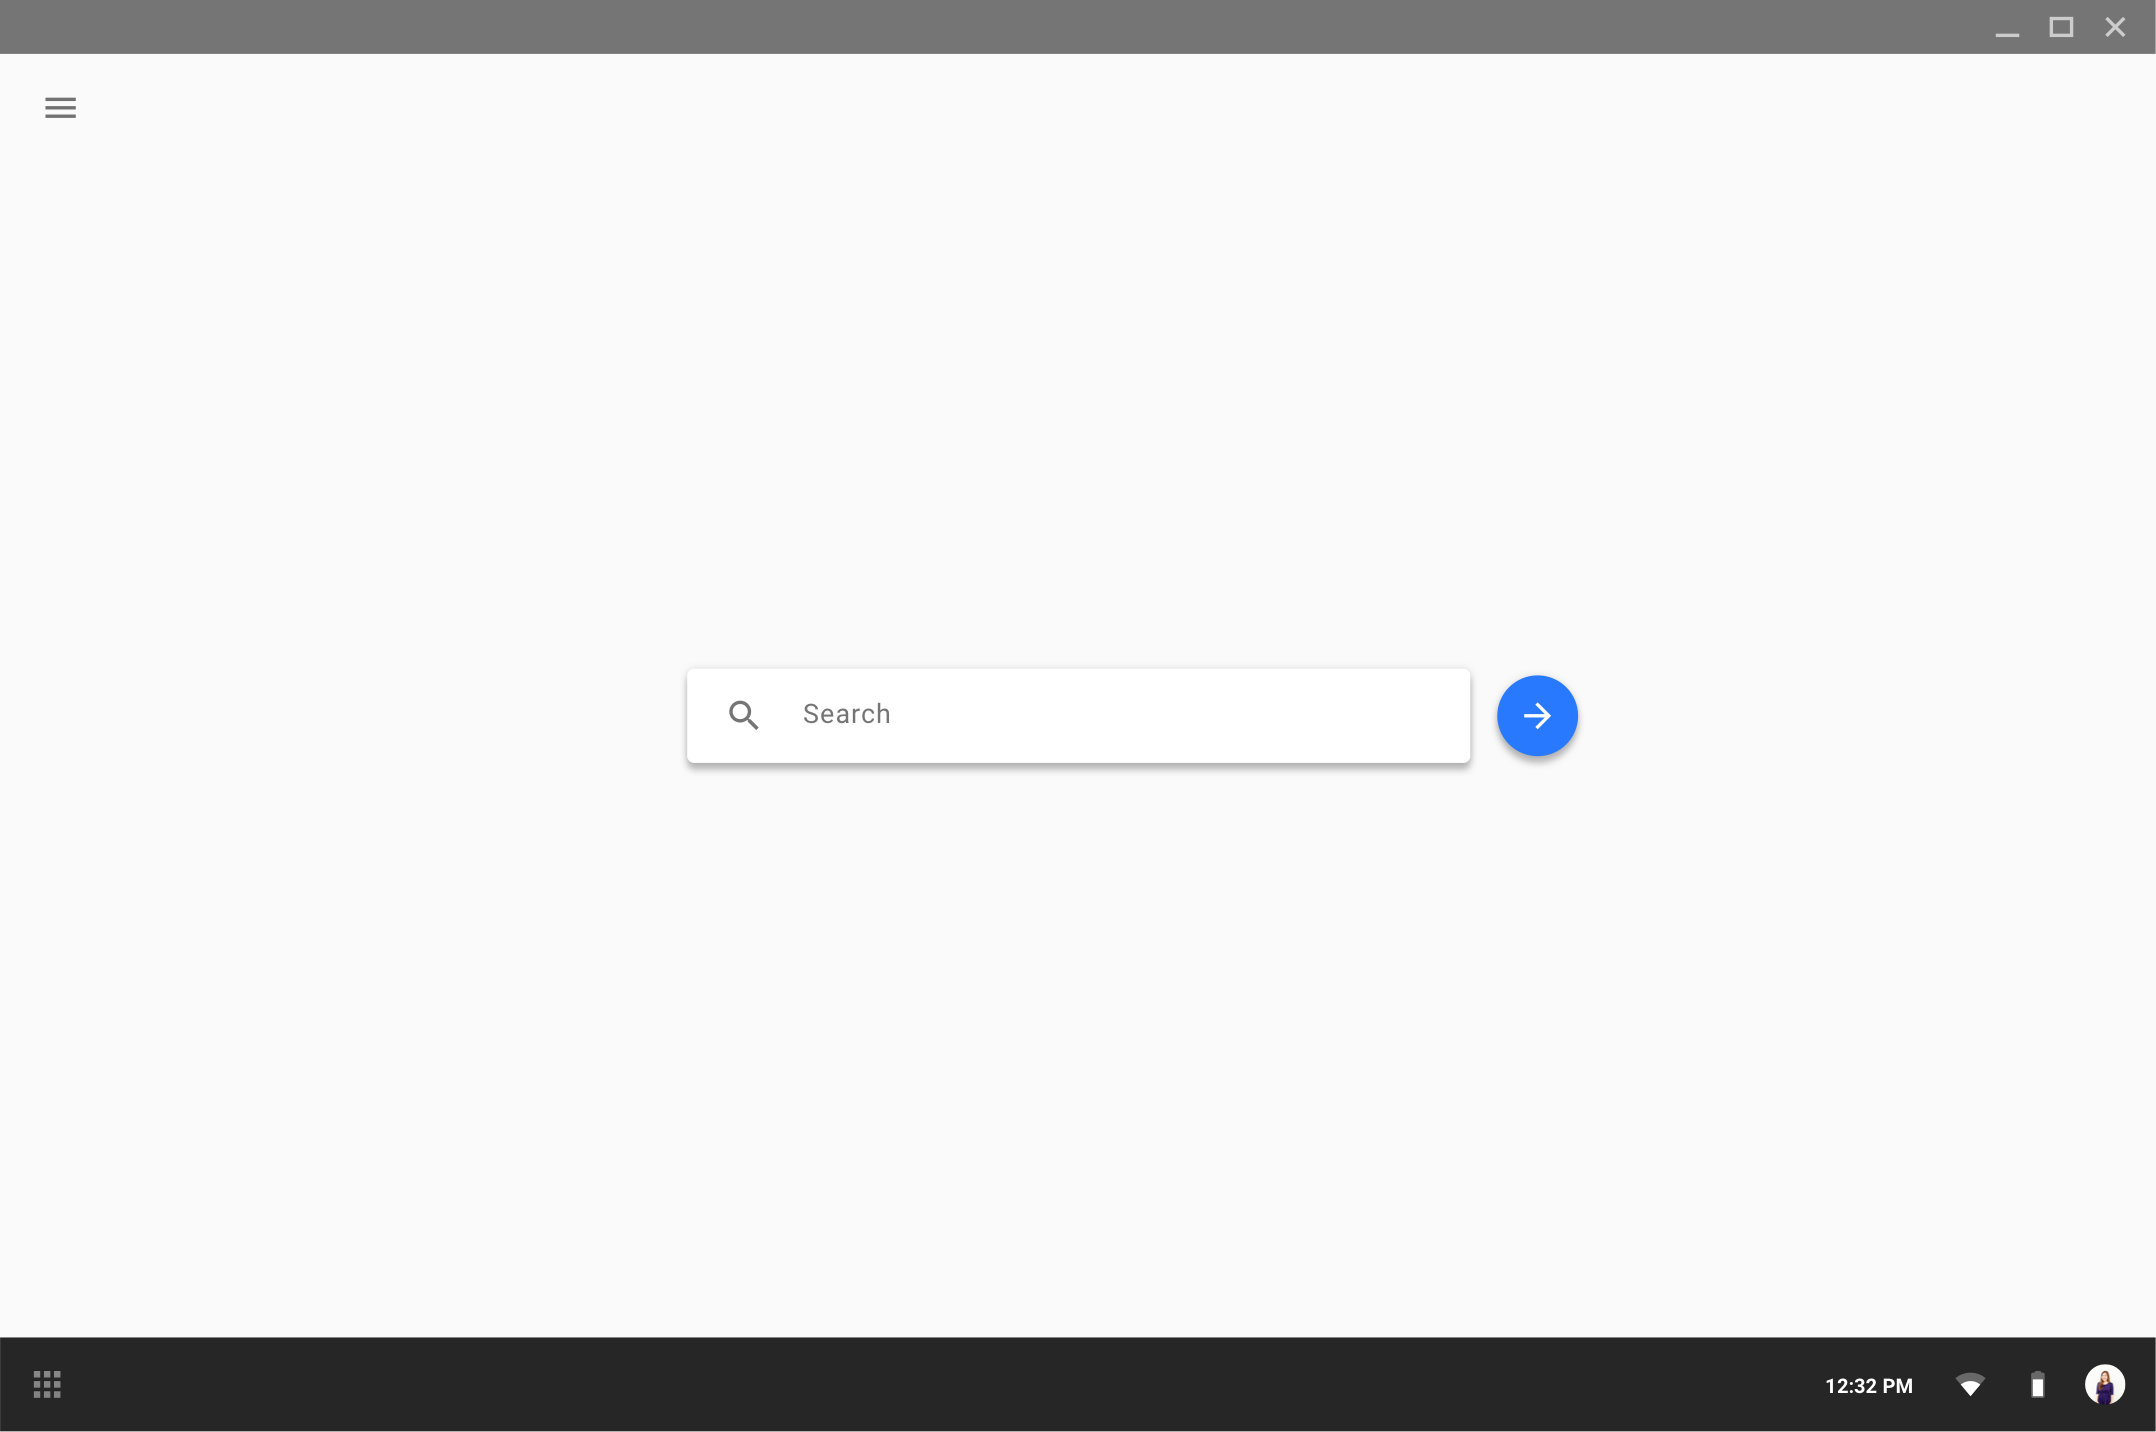 Text fields - Components - Material design guidelines